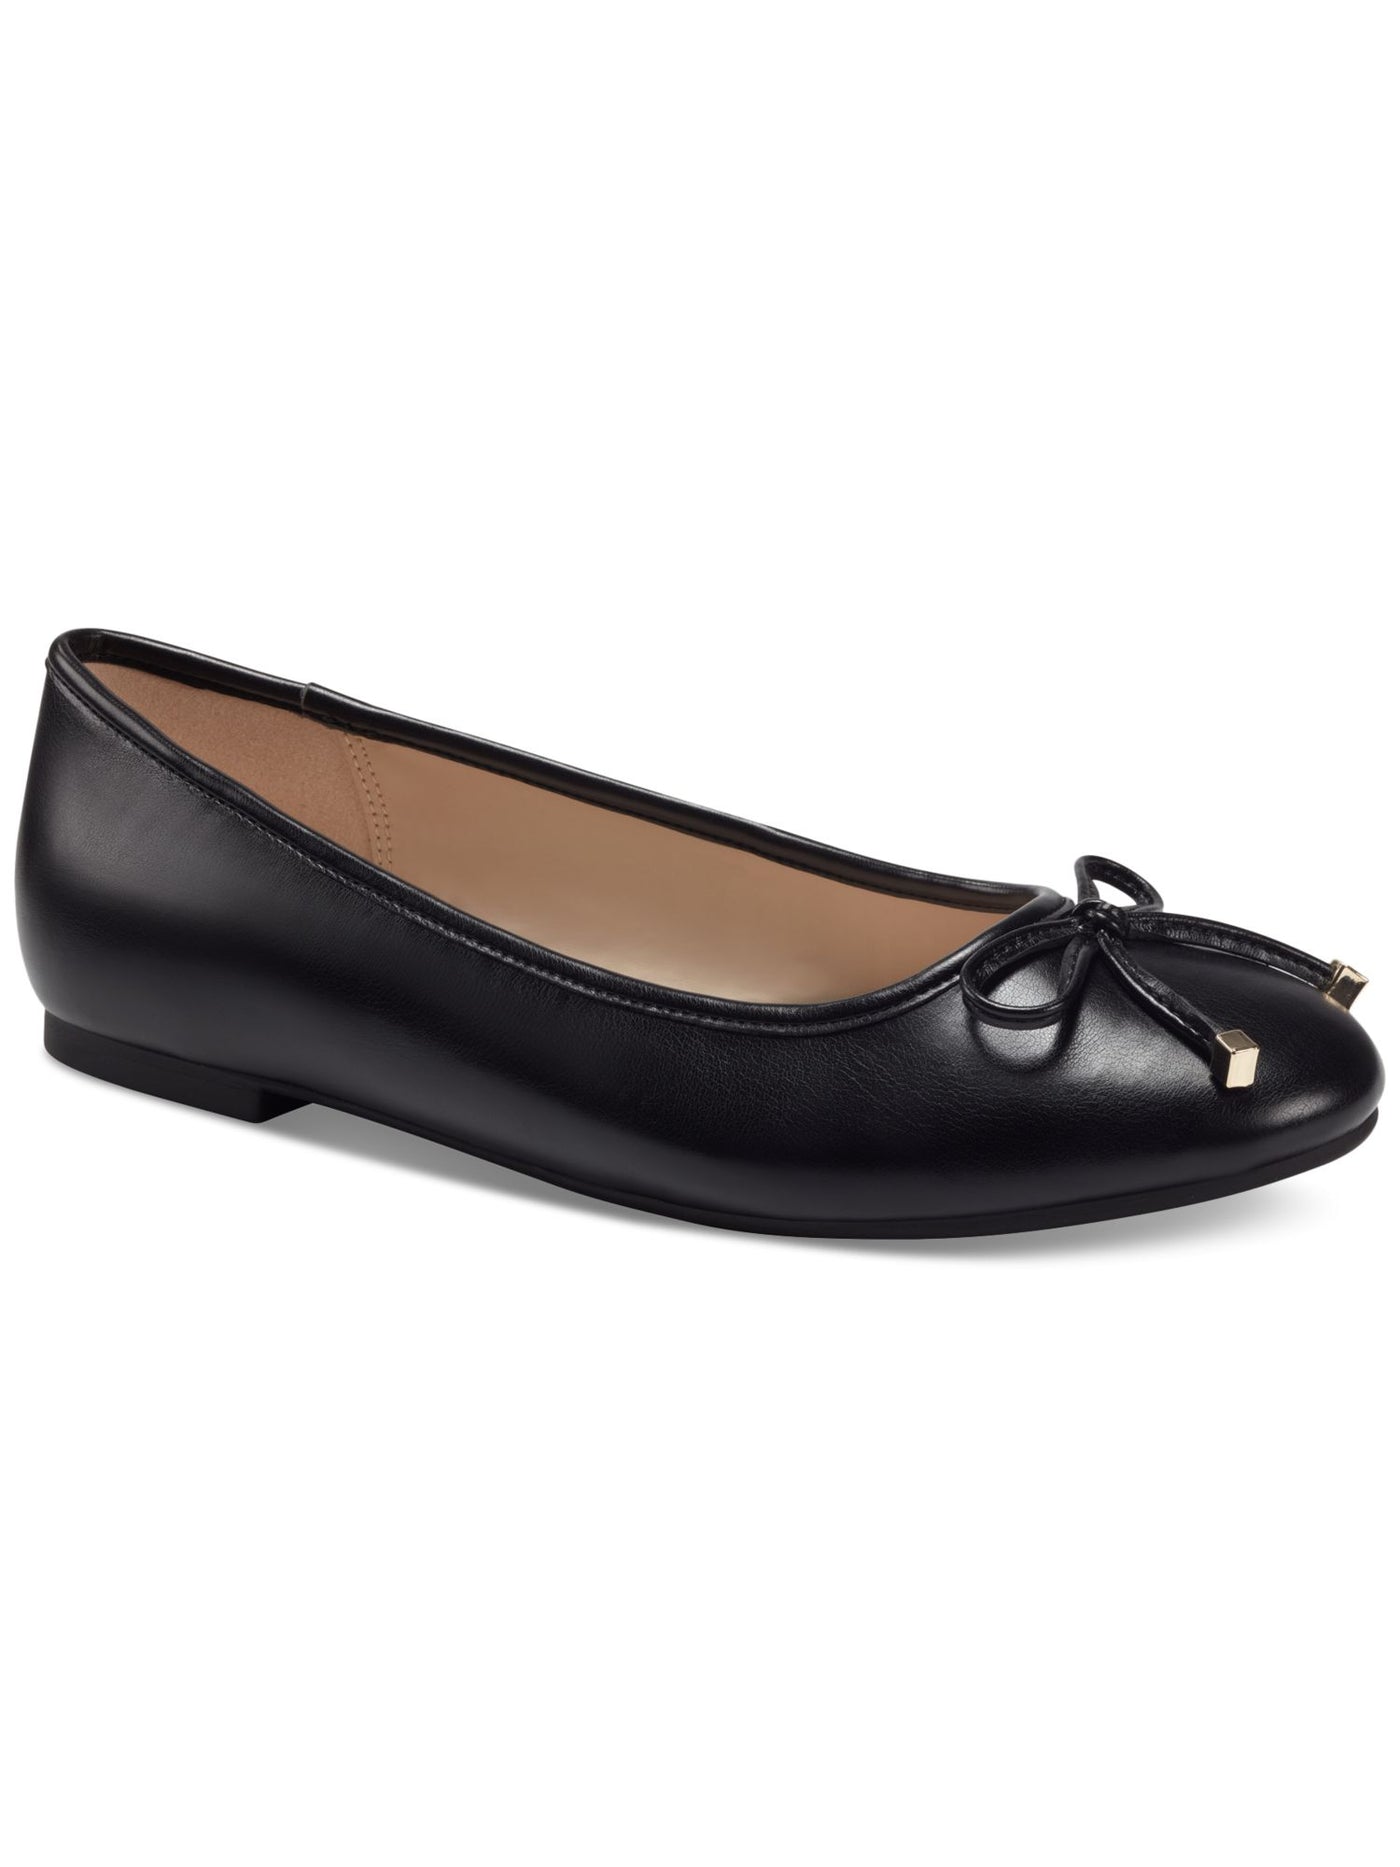 CHARTER CLUB Womens Black Bow Accent Padded Kaii Round Toe Slip On Ballet Flats 7.5 M